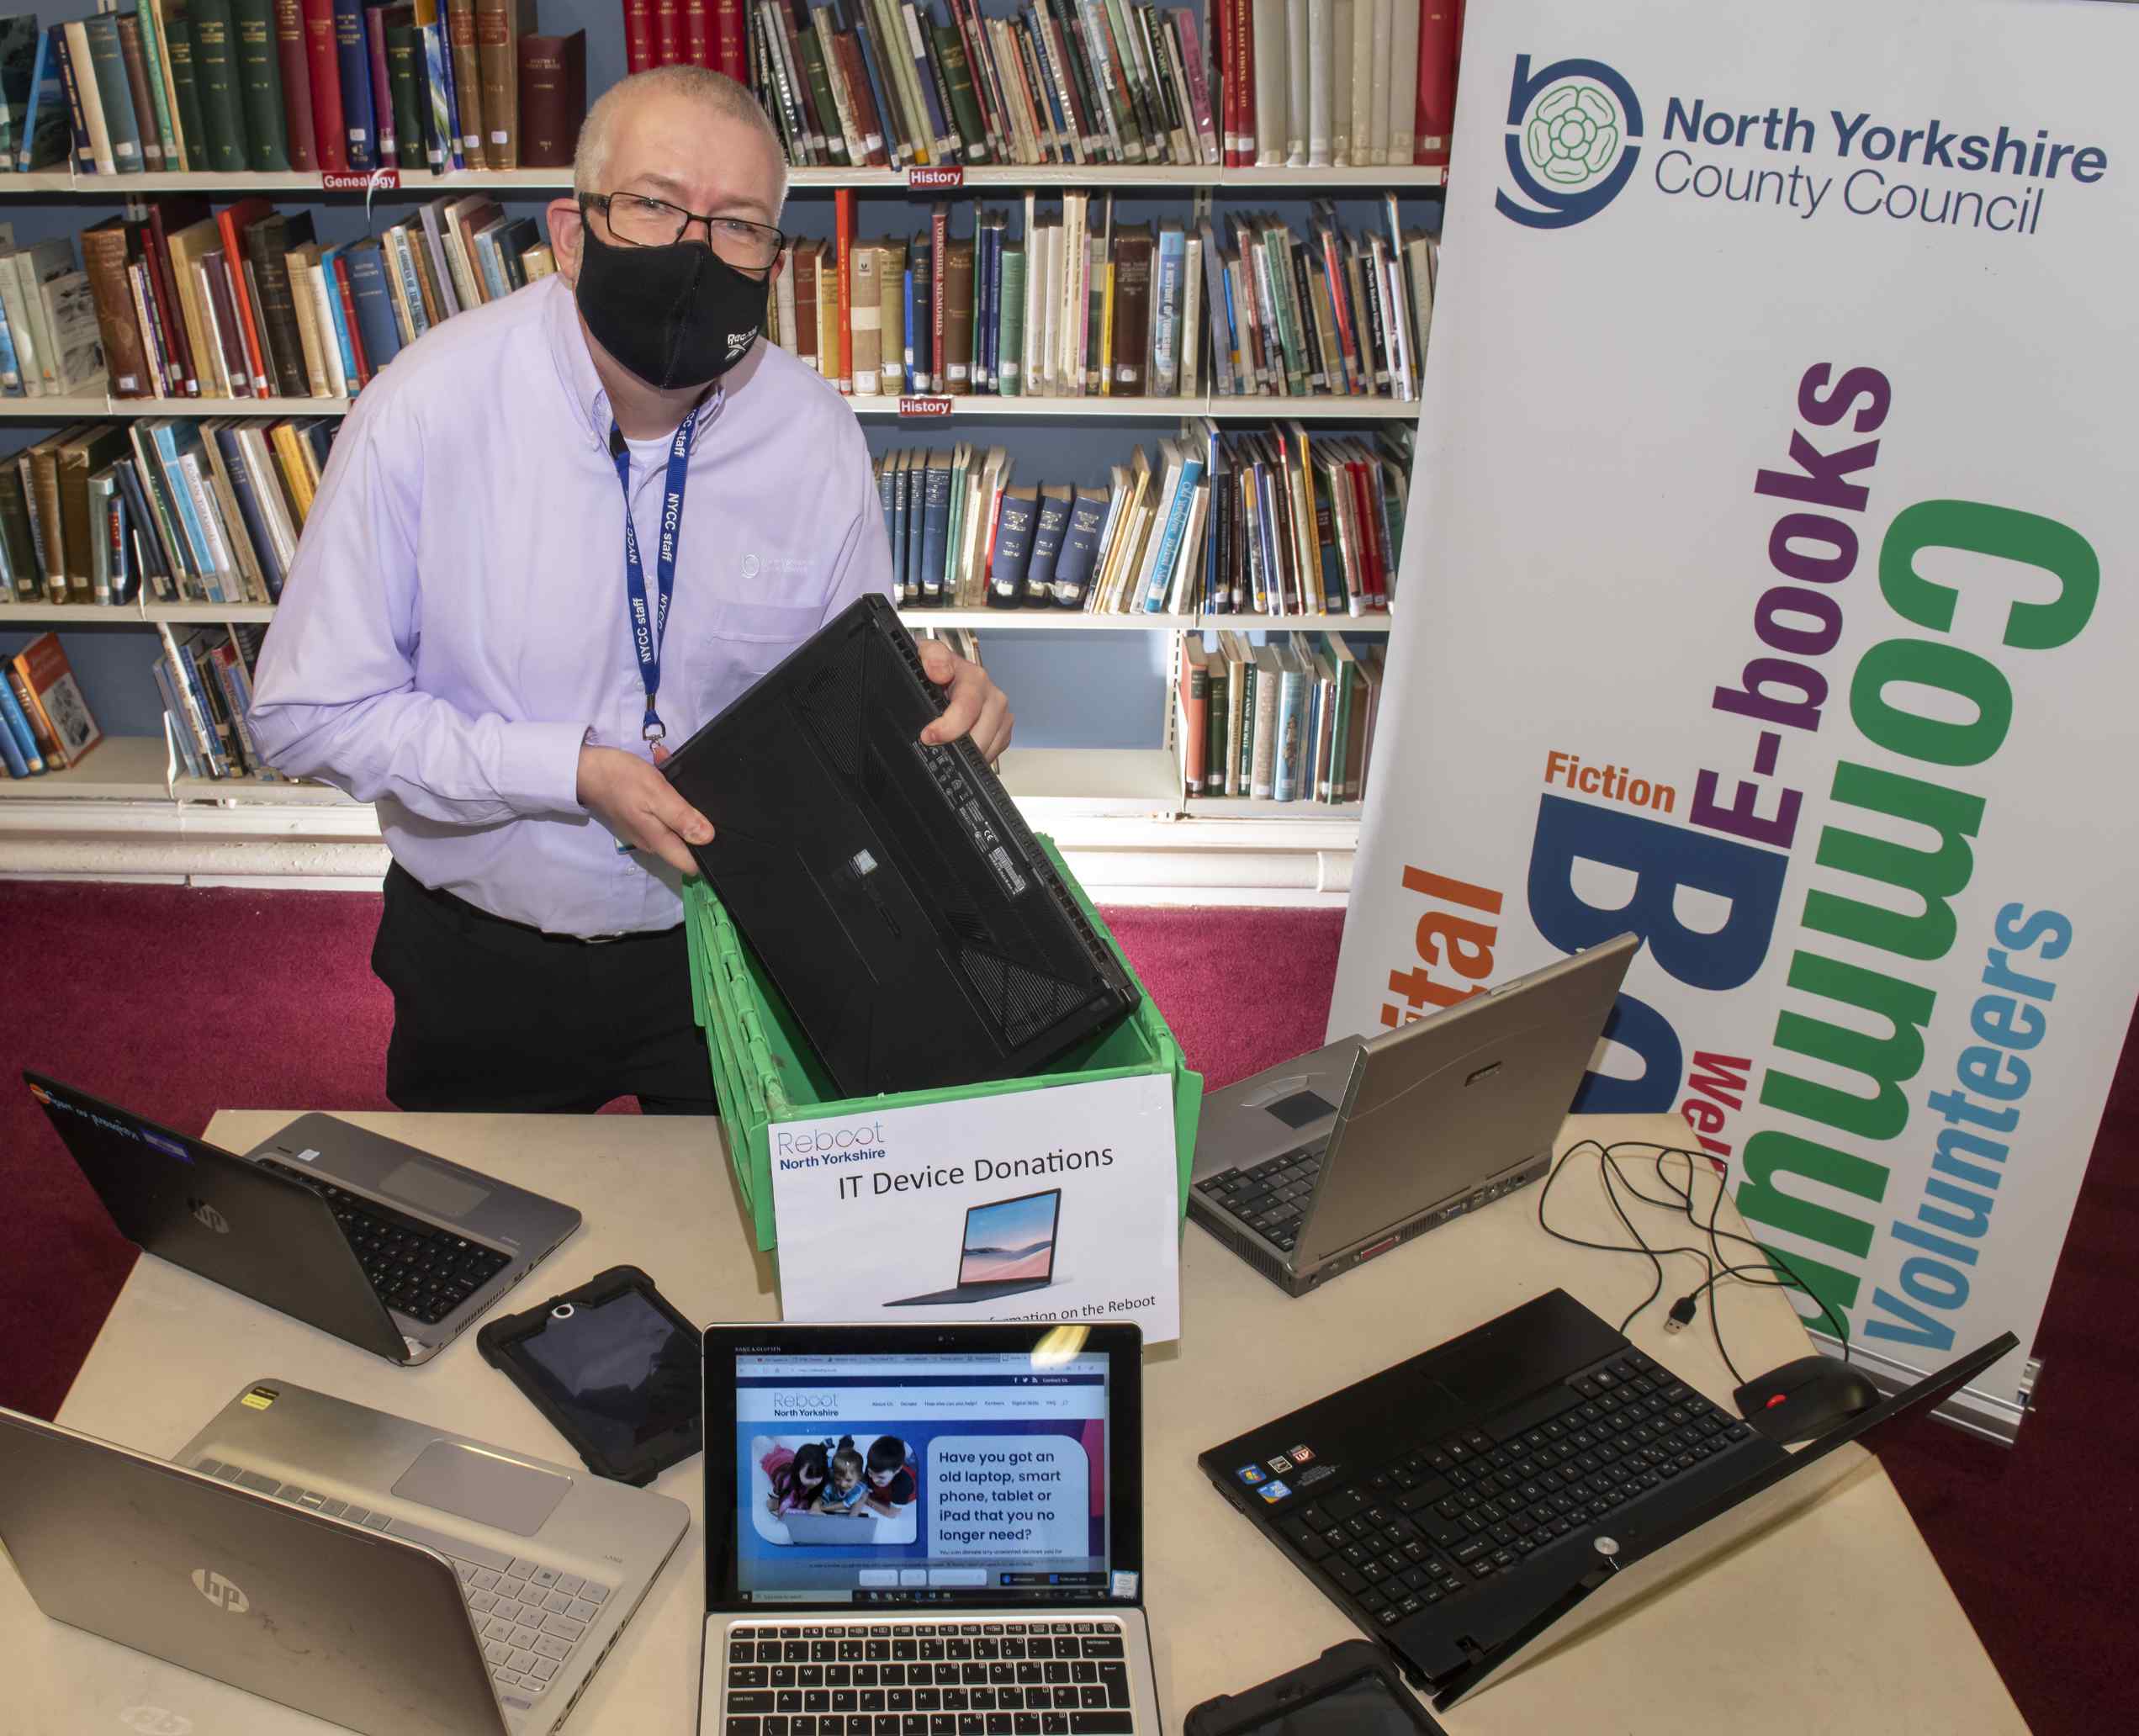 Mark Glossop from Scarborough library with dropped-off lap-tops and the Reboot North Yorkshire website